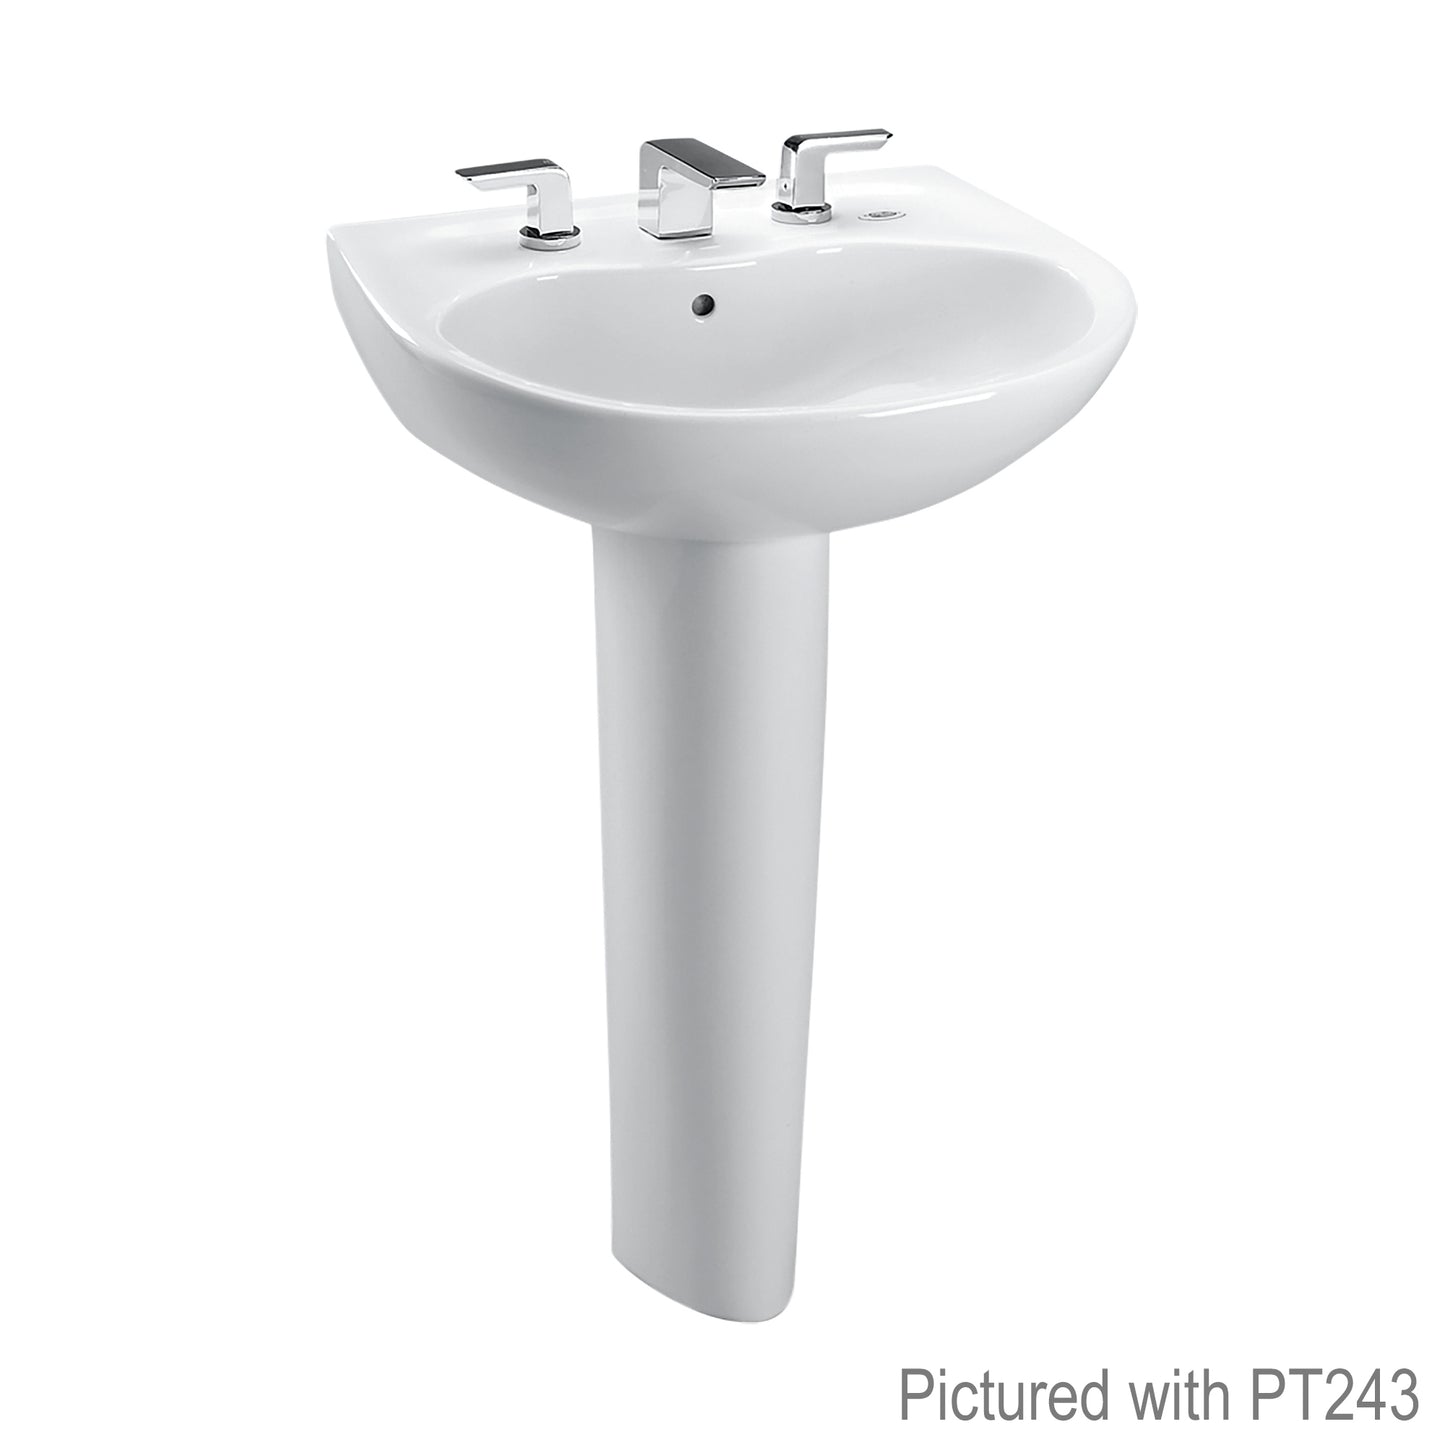 Toto LT242.8G#11 - Prominence 8" Faucet Centers Wall Mount Bathroom Sink - Colonial White